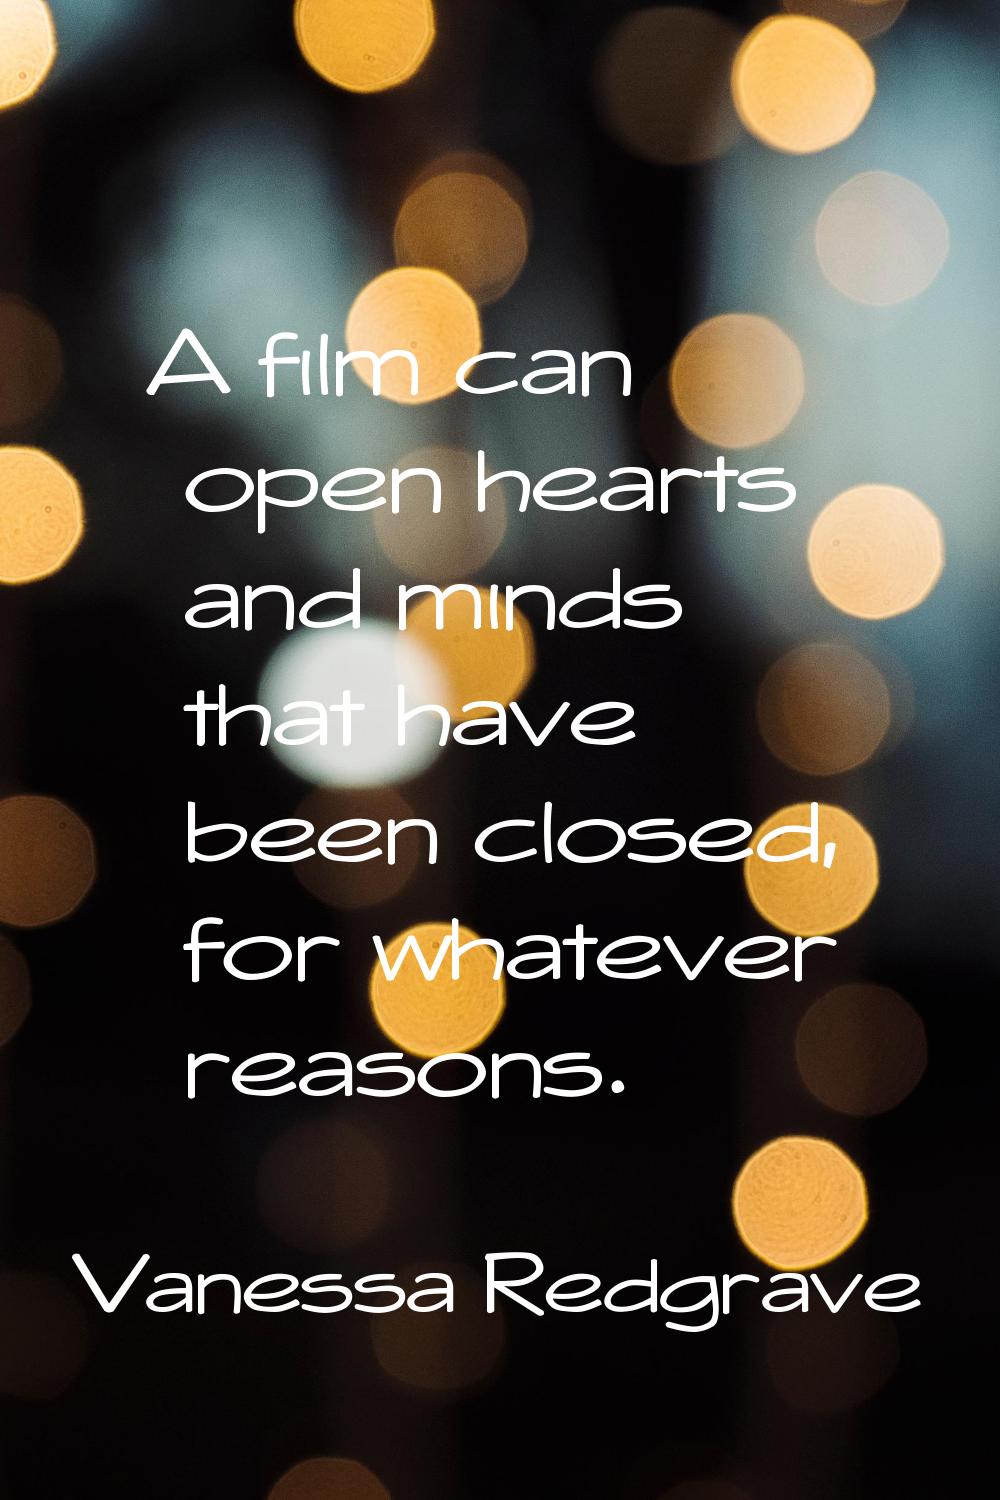 A film can open hearts and minds that have been closed, for whatever reasons.